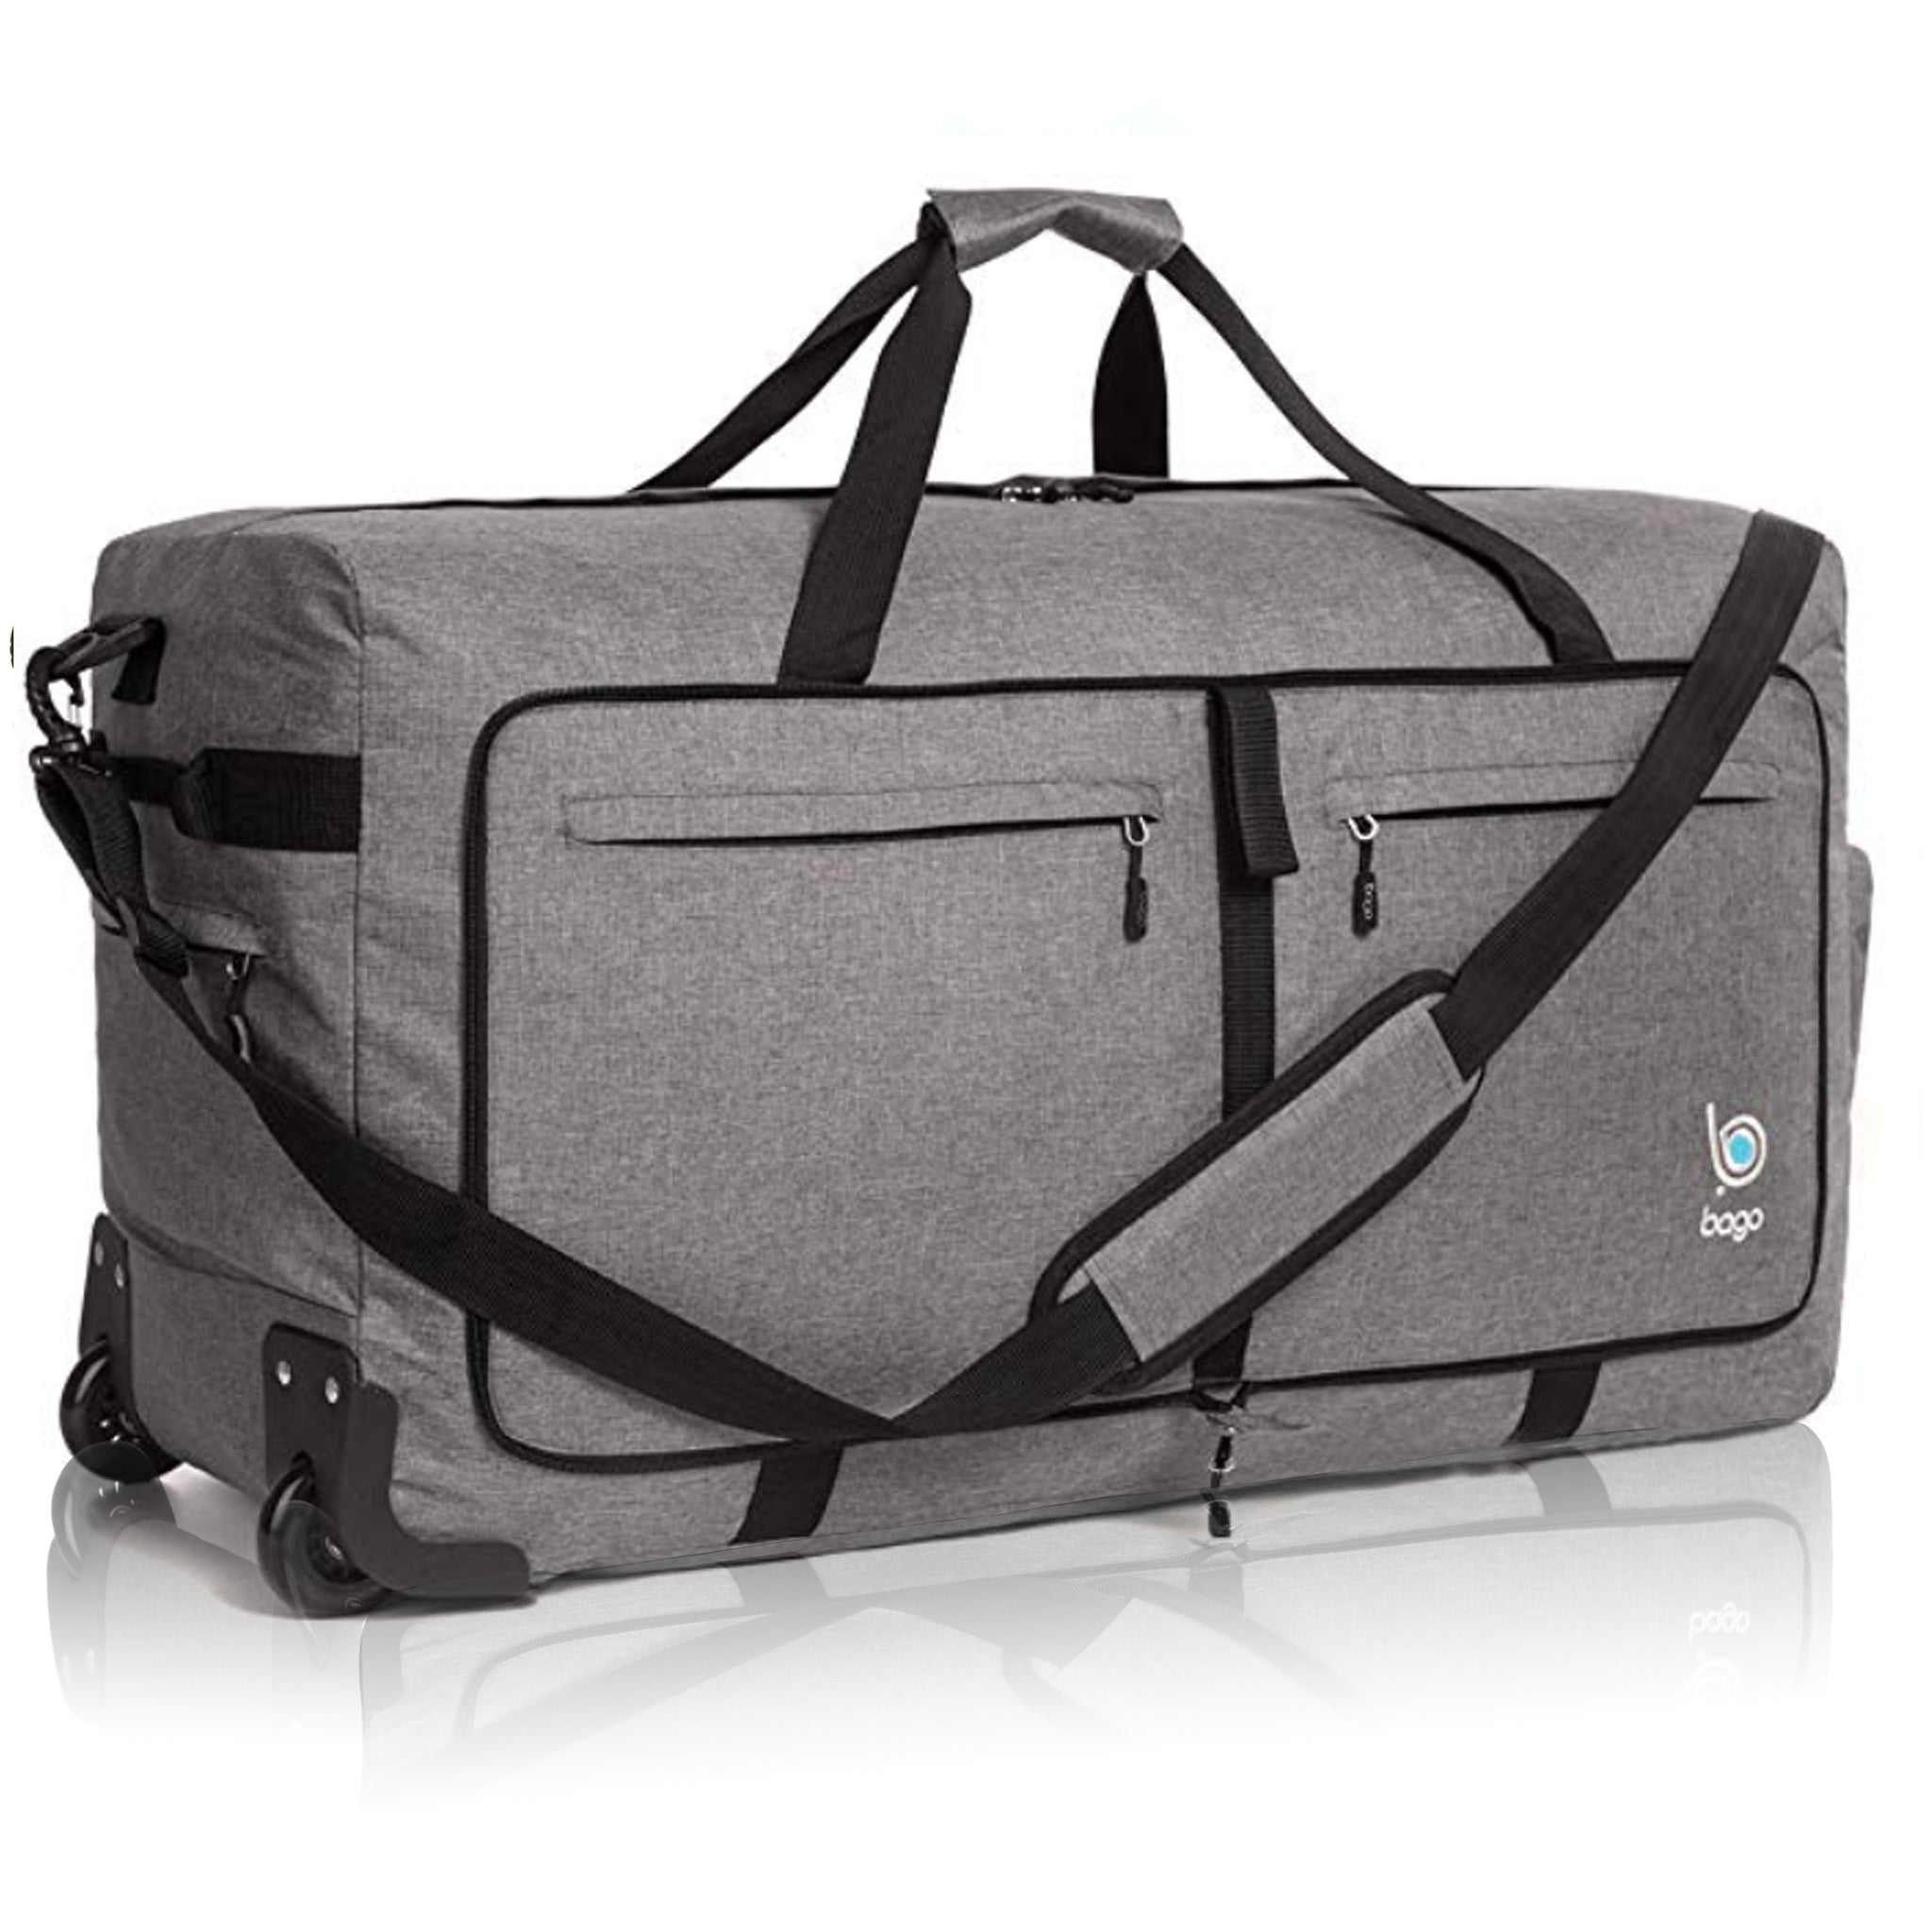 mens travel duffle bag with wheels